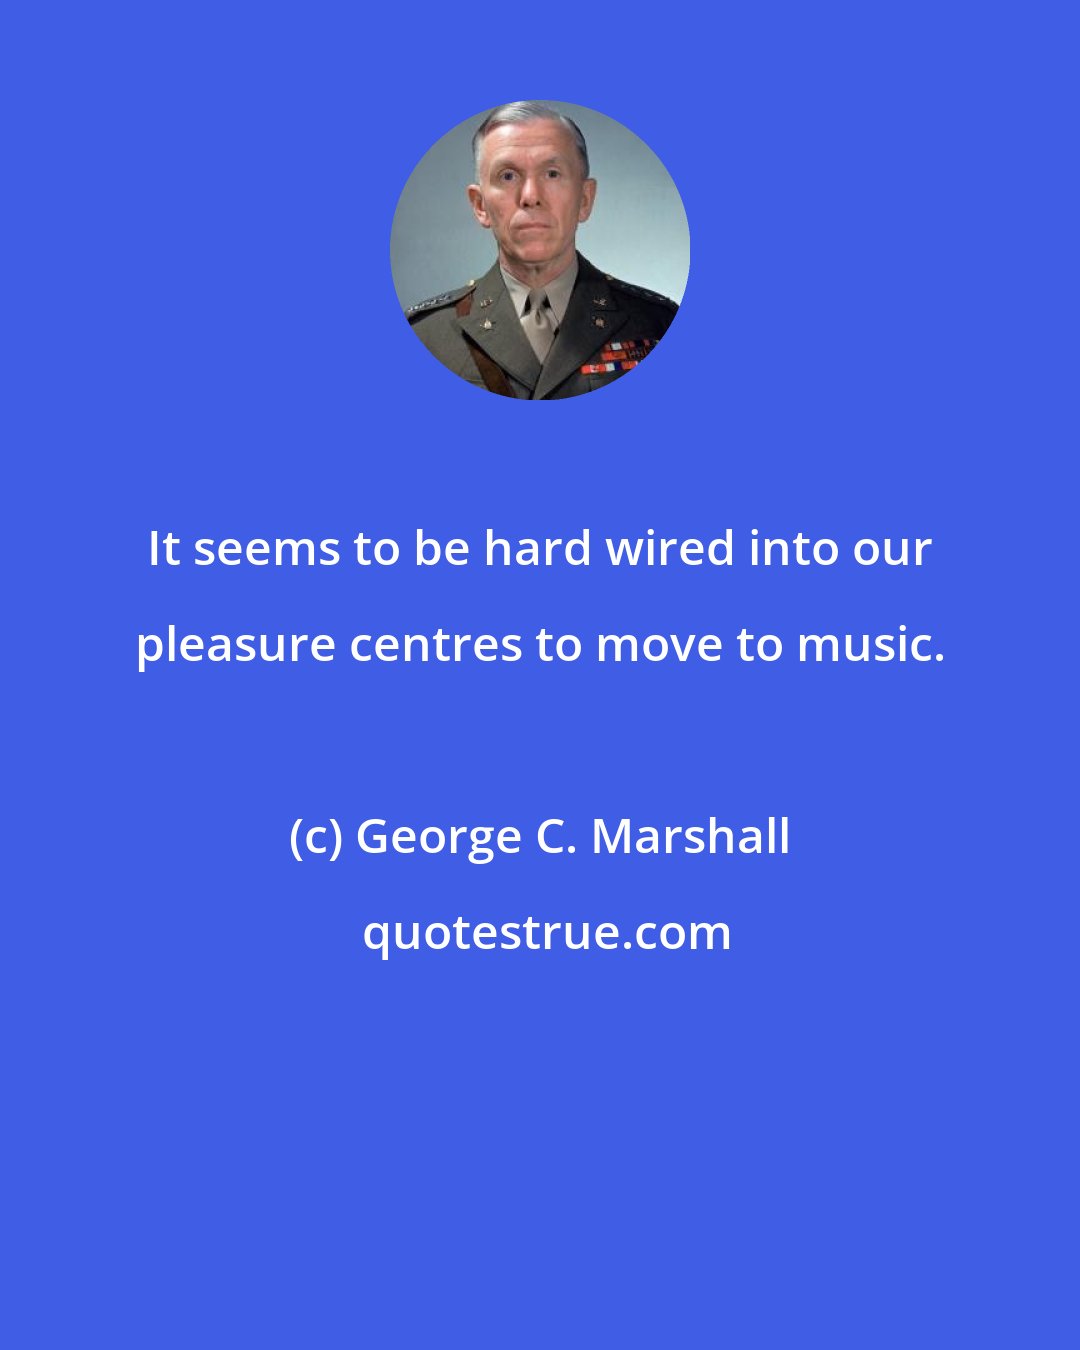 George C. Marshall: It seems to be hard wired into our pleasure centres to move to music.